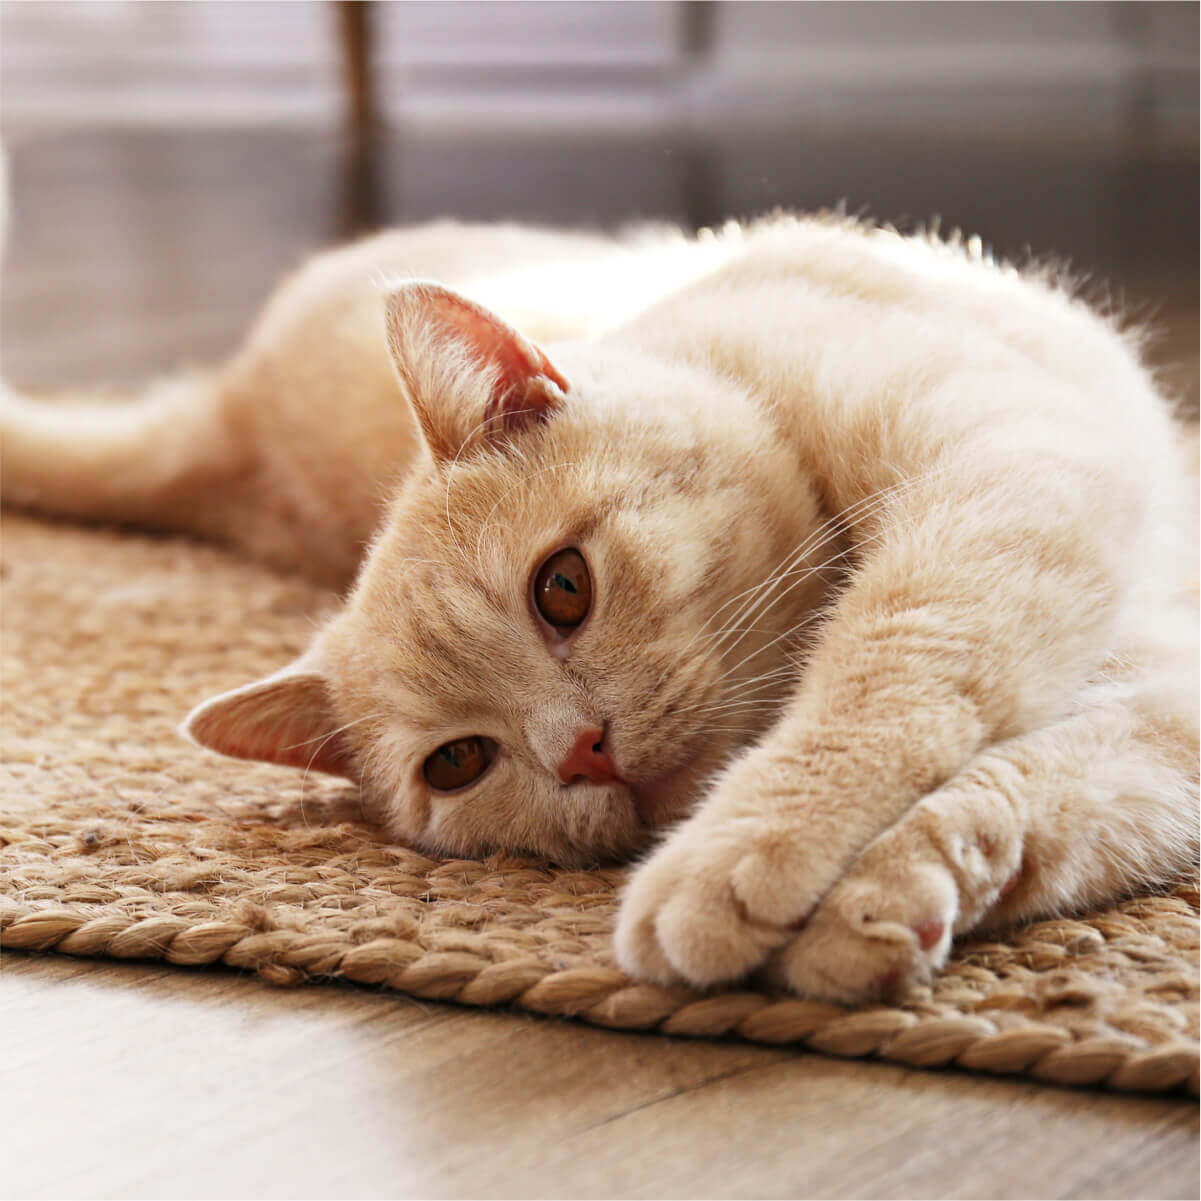 A cozy cat lounging on a soft rug, enjoying a peaceful nap in the comfort of its surroundings.